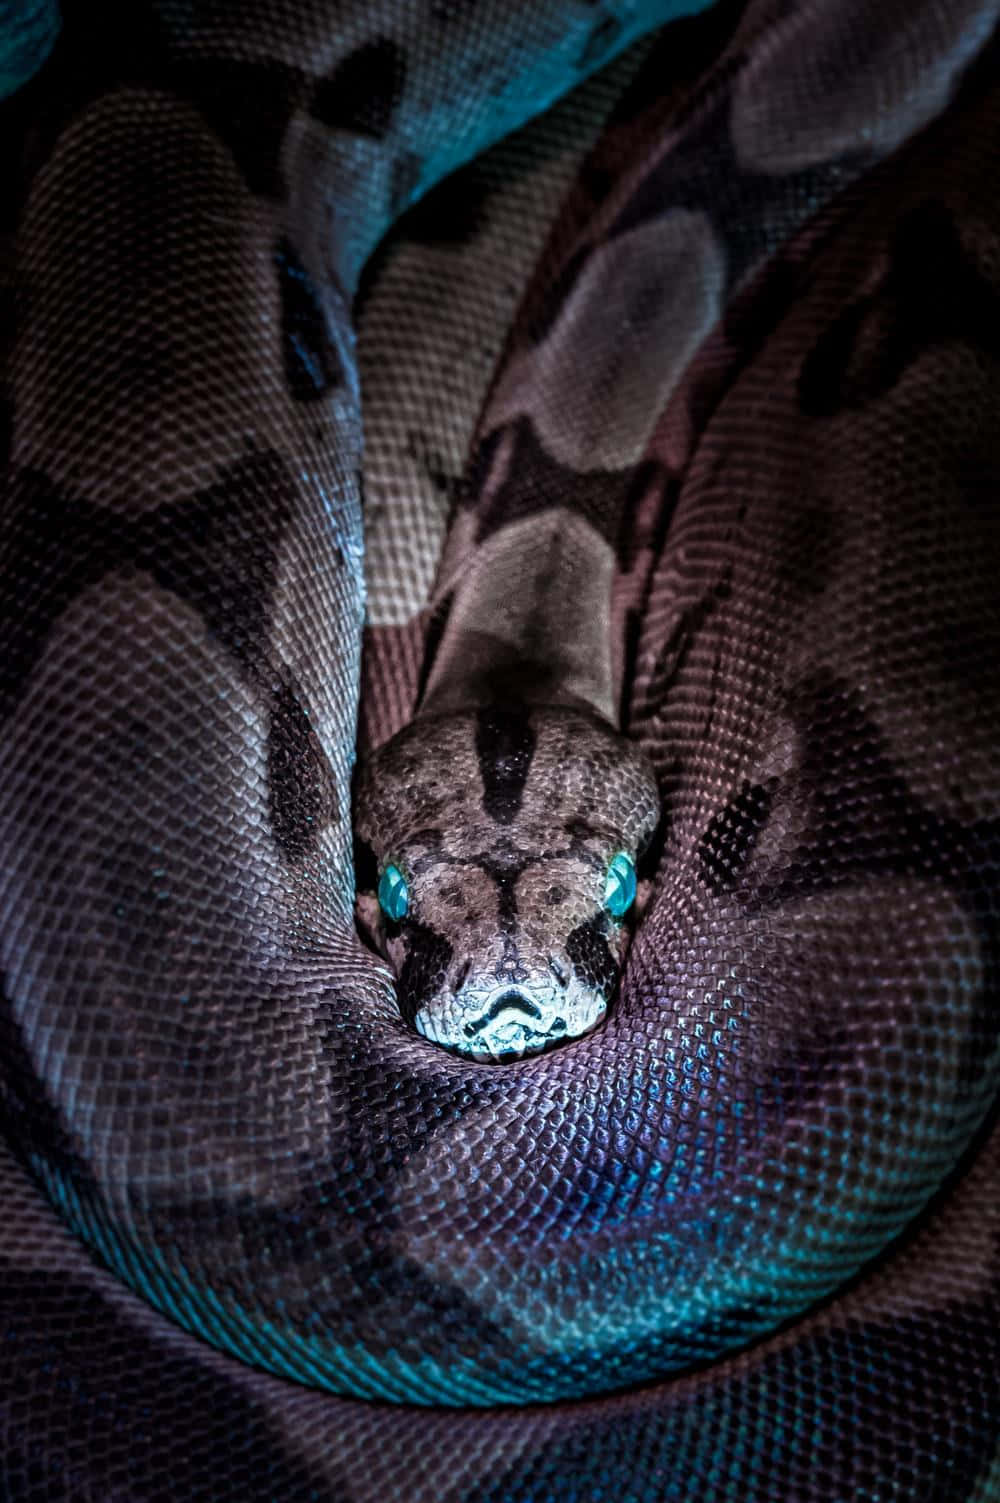 A Deadly Scary Snake